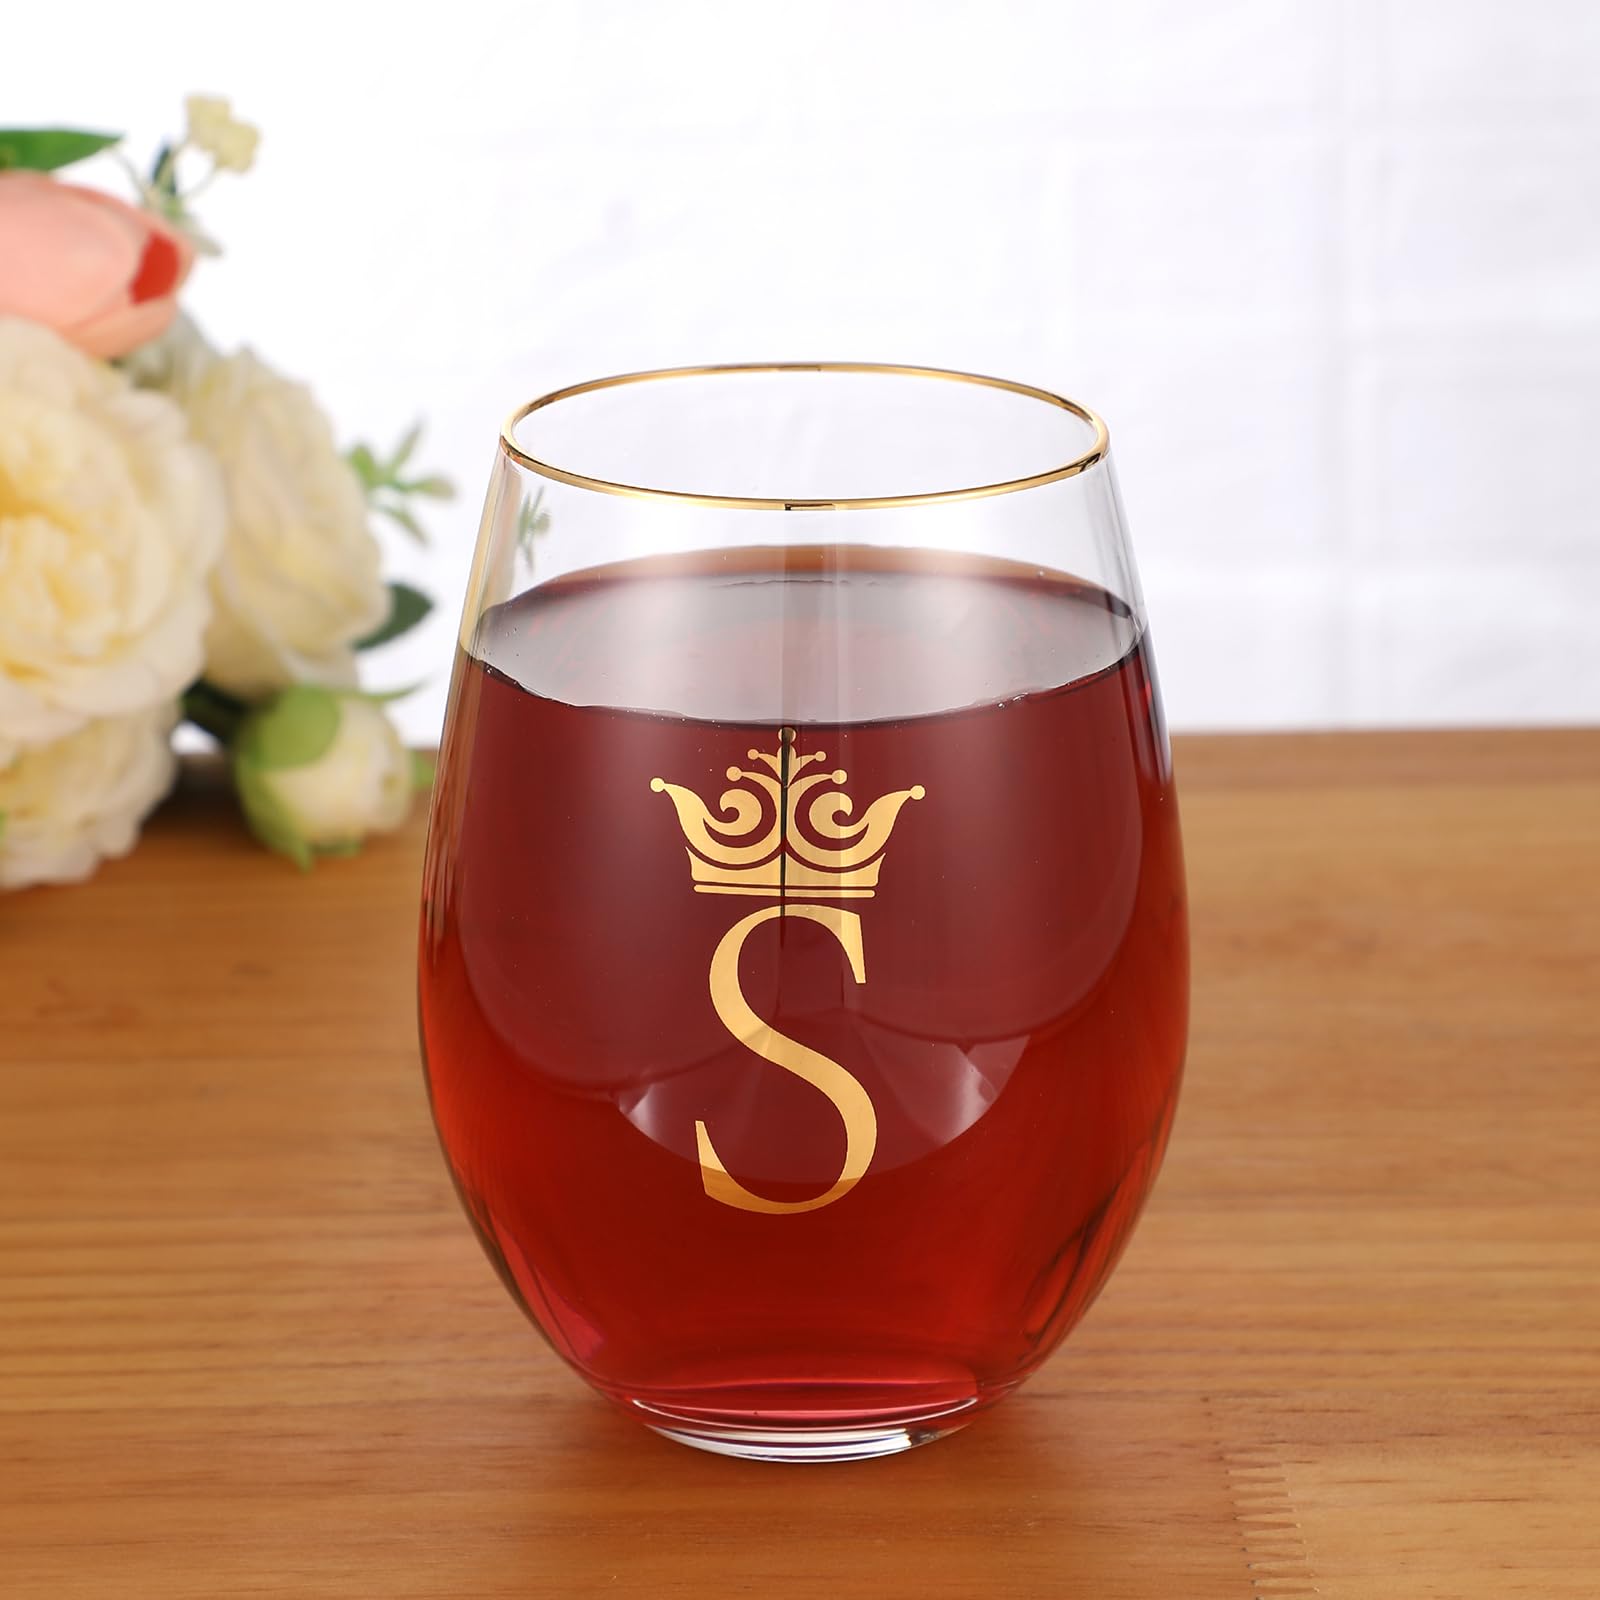 COFOZA Personalized Initial Gifts Letter S 15 Ounce Wine Glass Tumbler Wedding Bridesmaid Birthday Graduation Gift for Men Women Monogrammed Gift Cup (S)